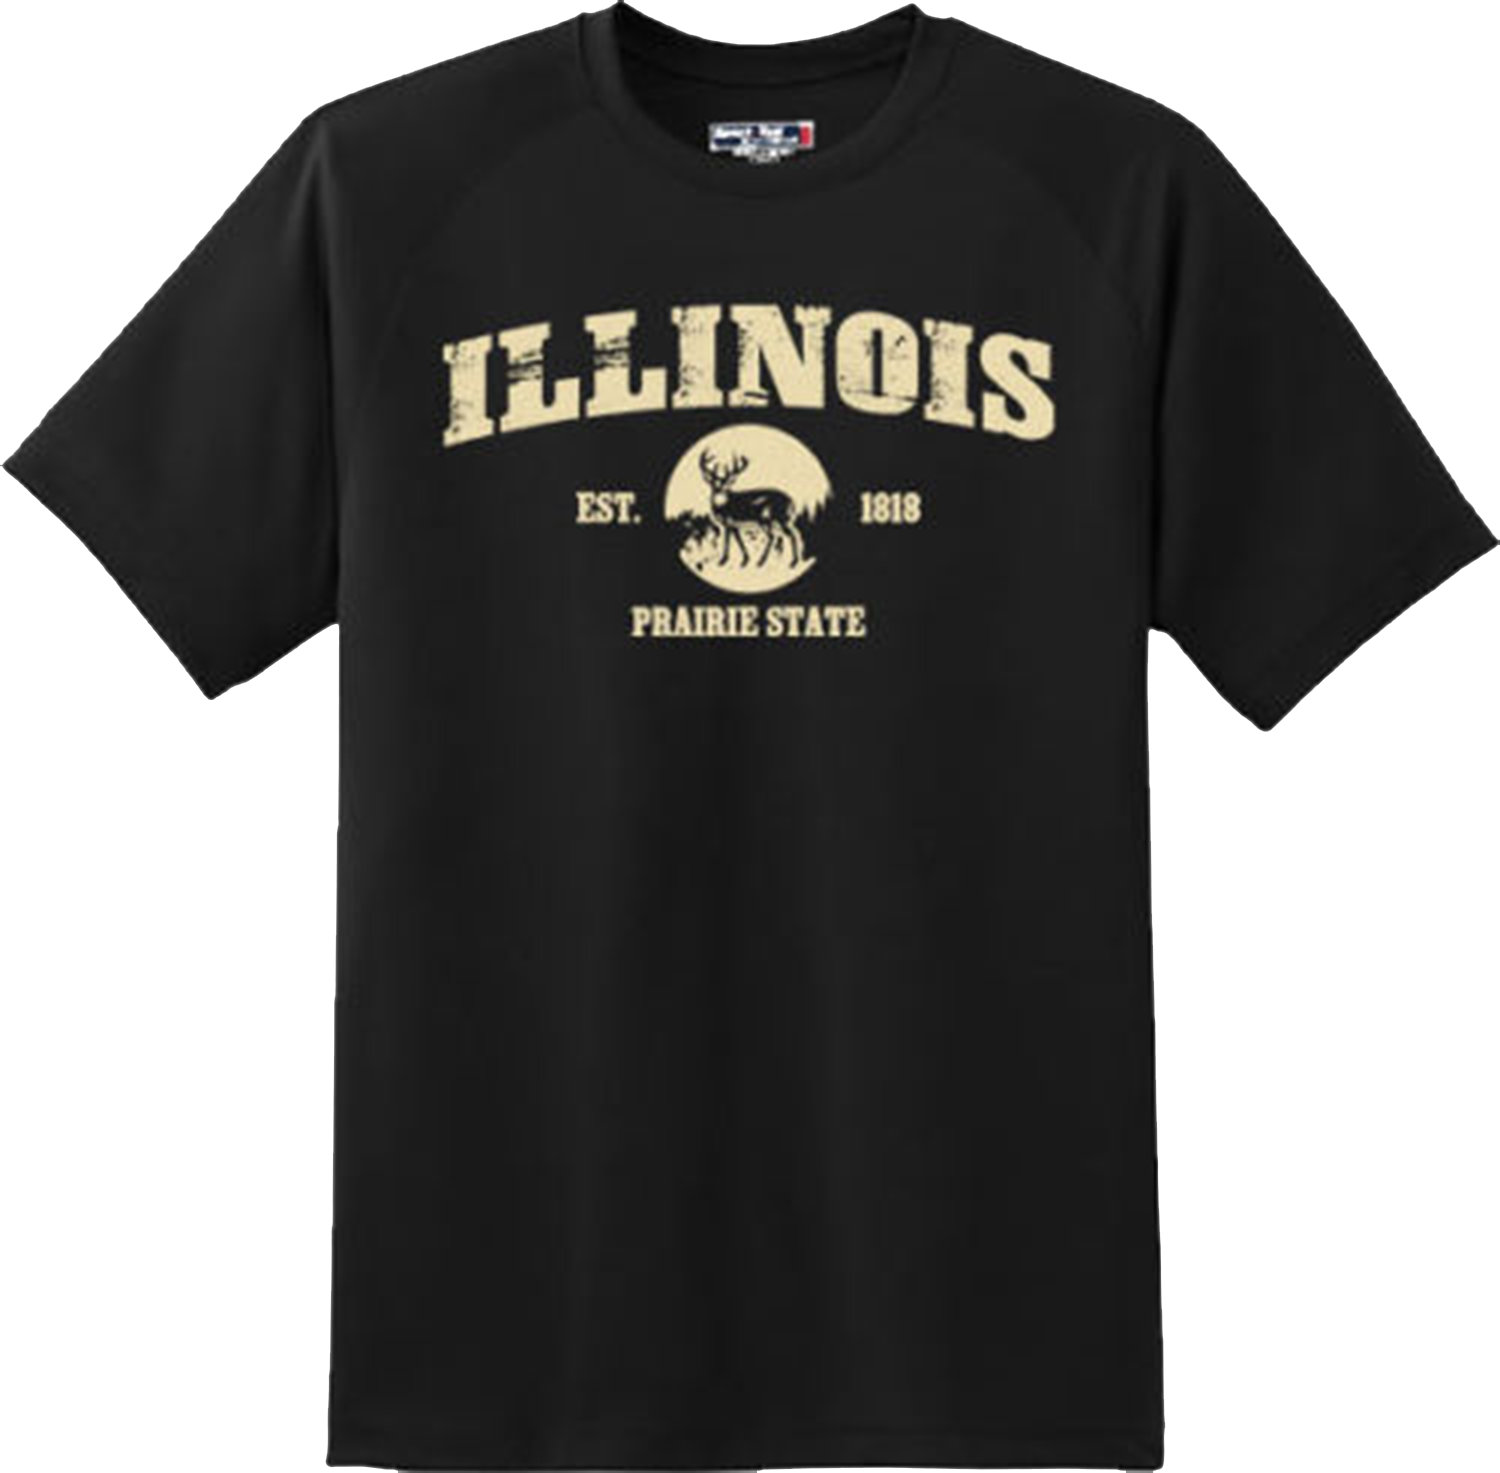 Illinois State Vintage Retro Hometown America Gift T Shirt New Graphic Tee